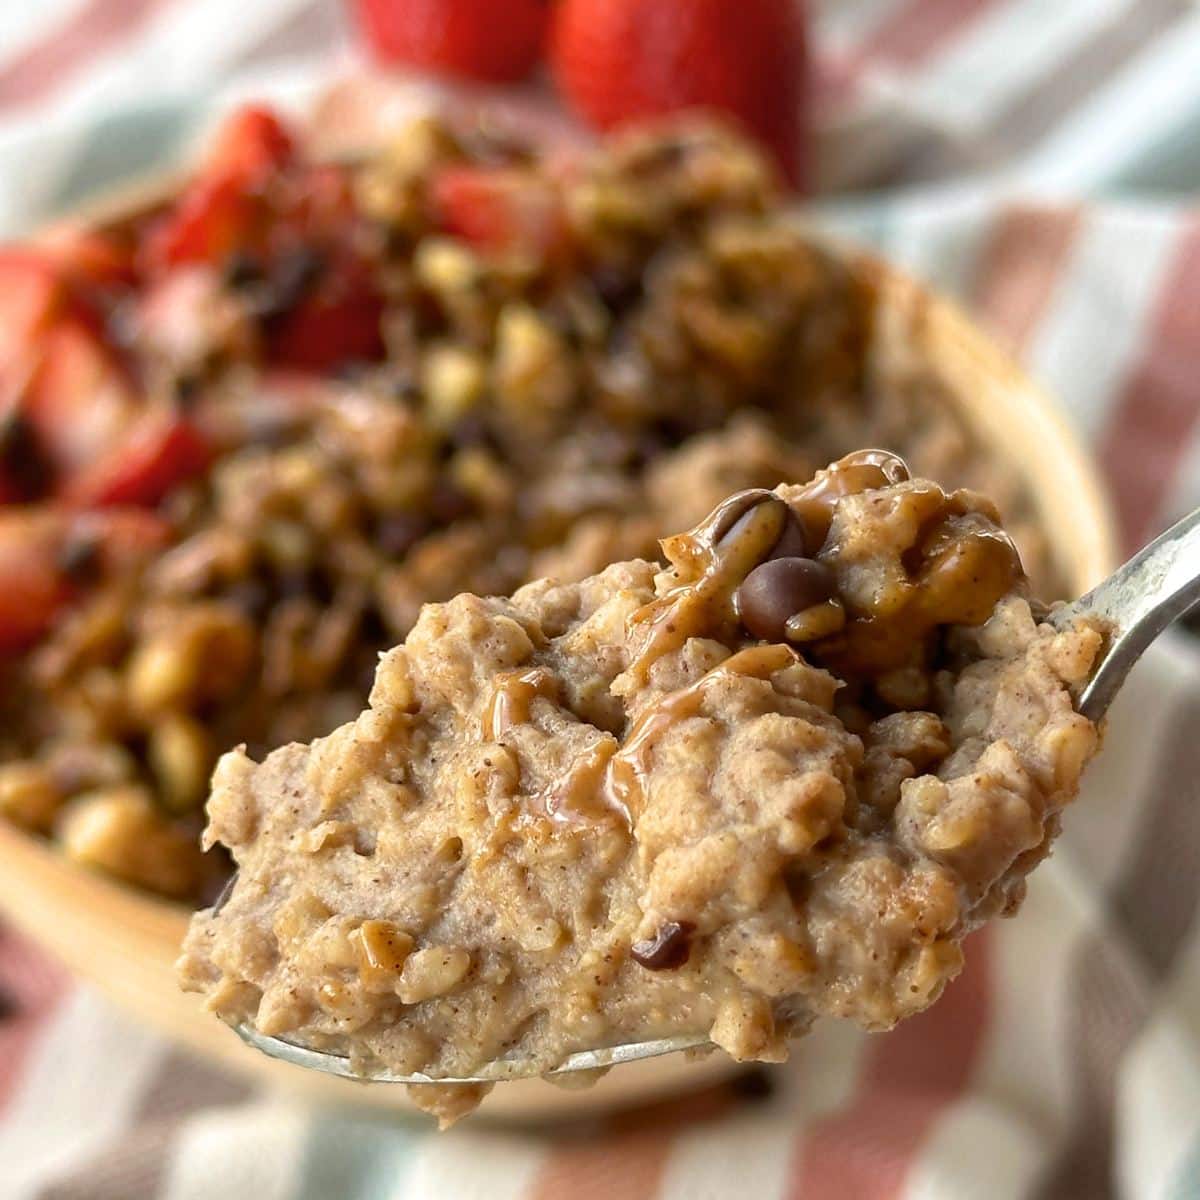 Protein steel cut oatmeal on a spoon with chocolate chips and almond butter. More oatmeal is in the background.